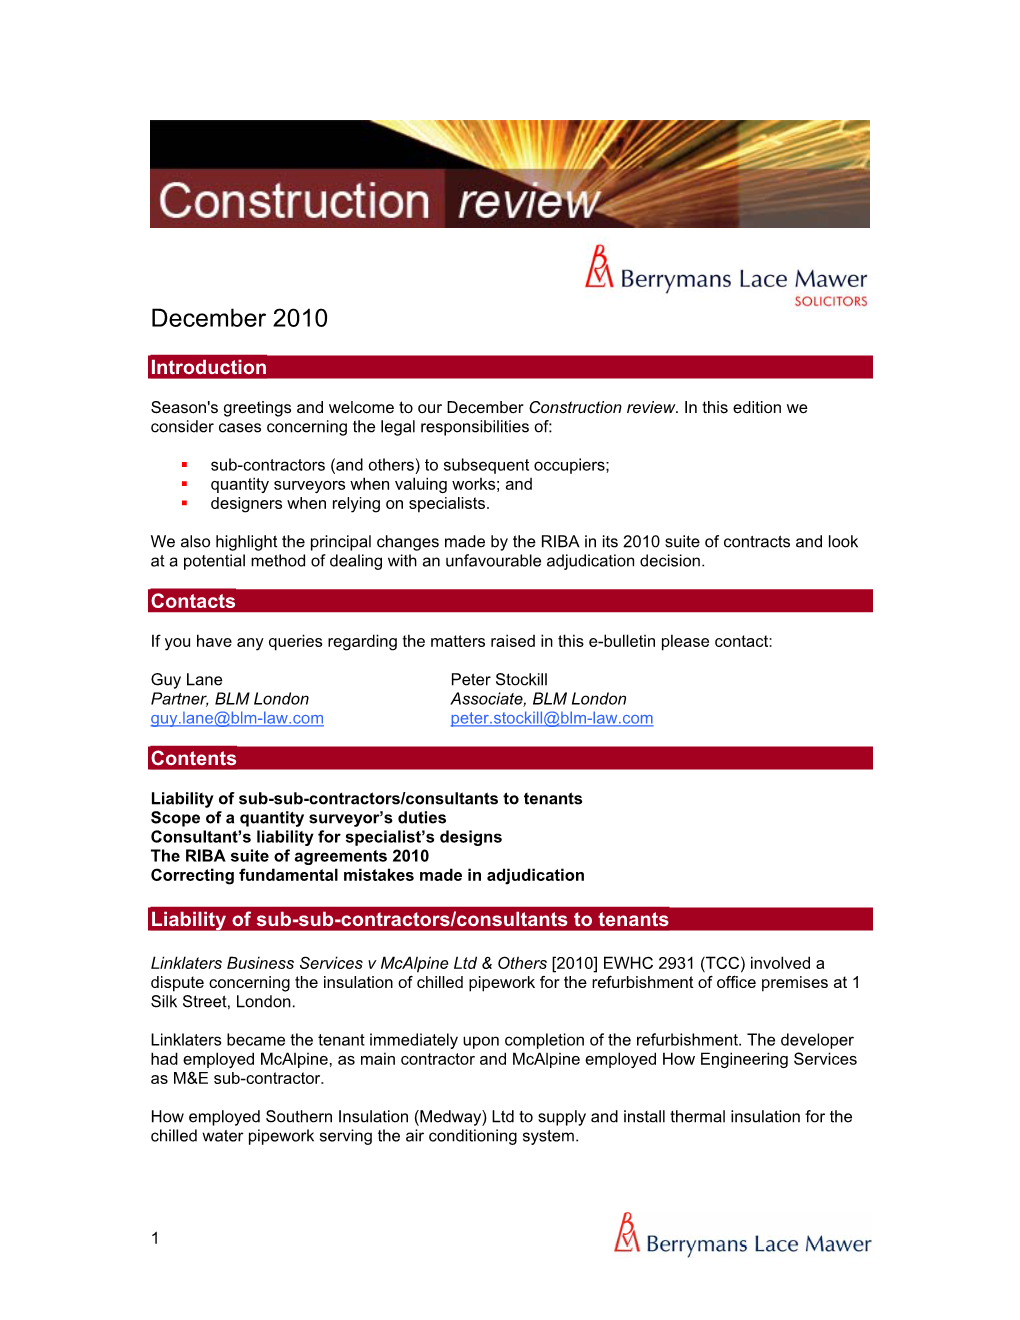 Construction Review 6